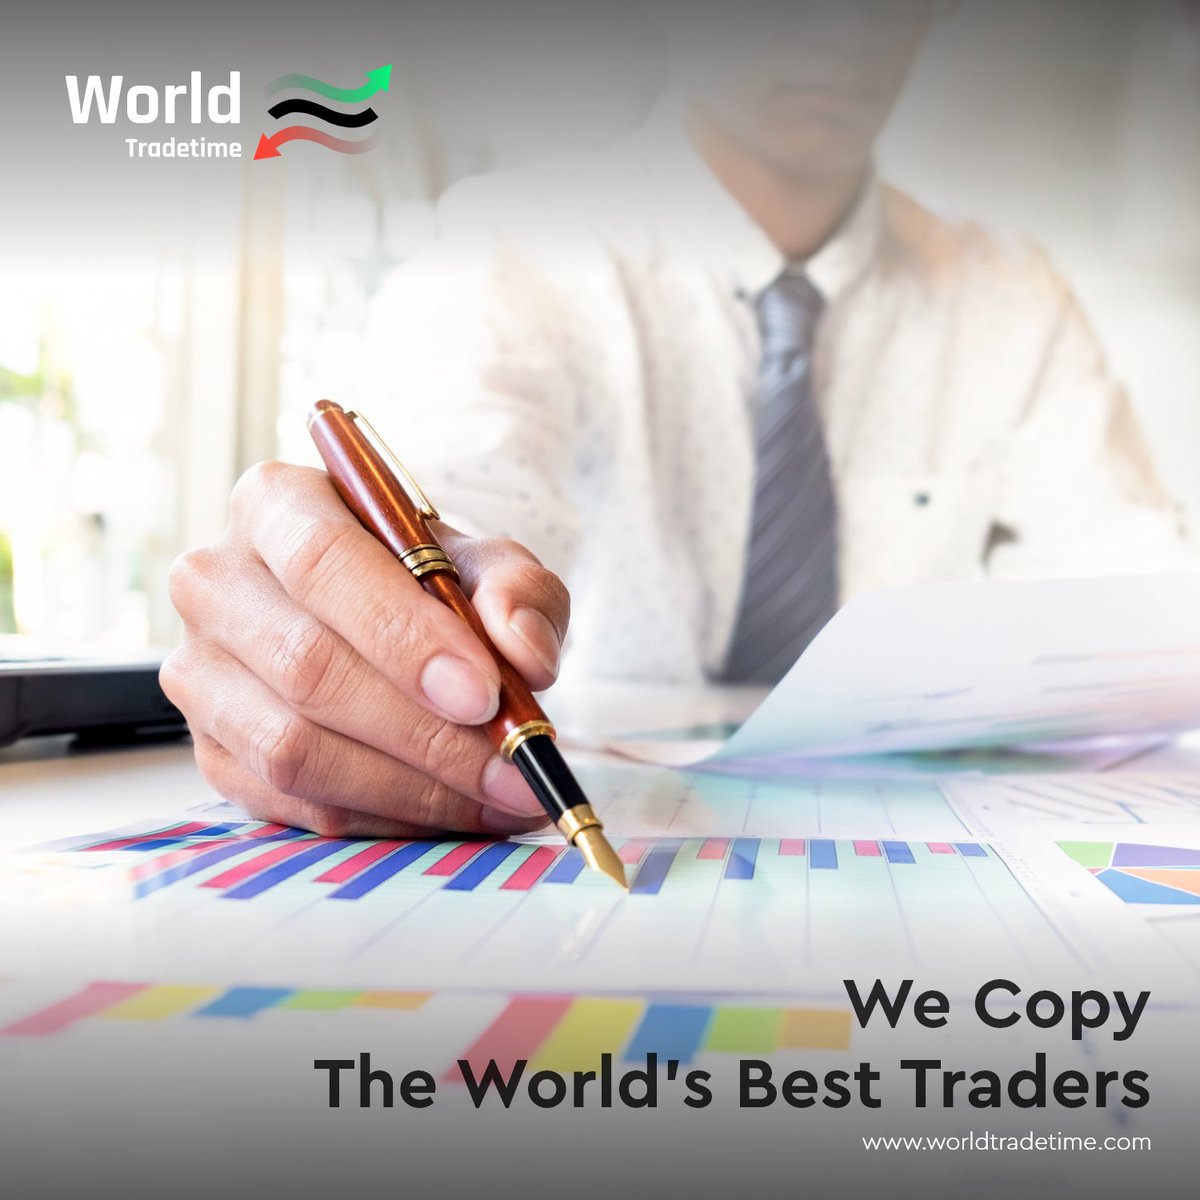 We Copy The World's Best Traders....!! visit at : worldtradetime.com  #worldtradetime #trading #cryptotrading #forextrading #profitsharing #safealgorithms #safe #bottrading #Automatetrade #cryptocurrency #Worldtrade #farming #investment